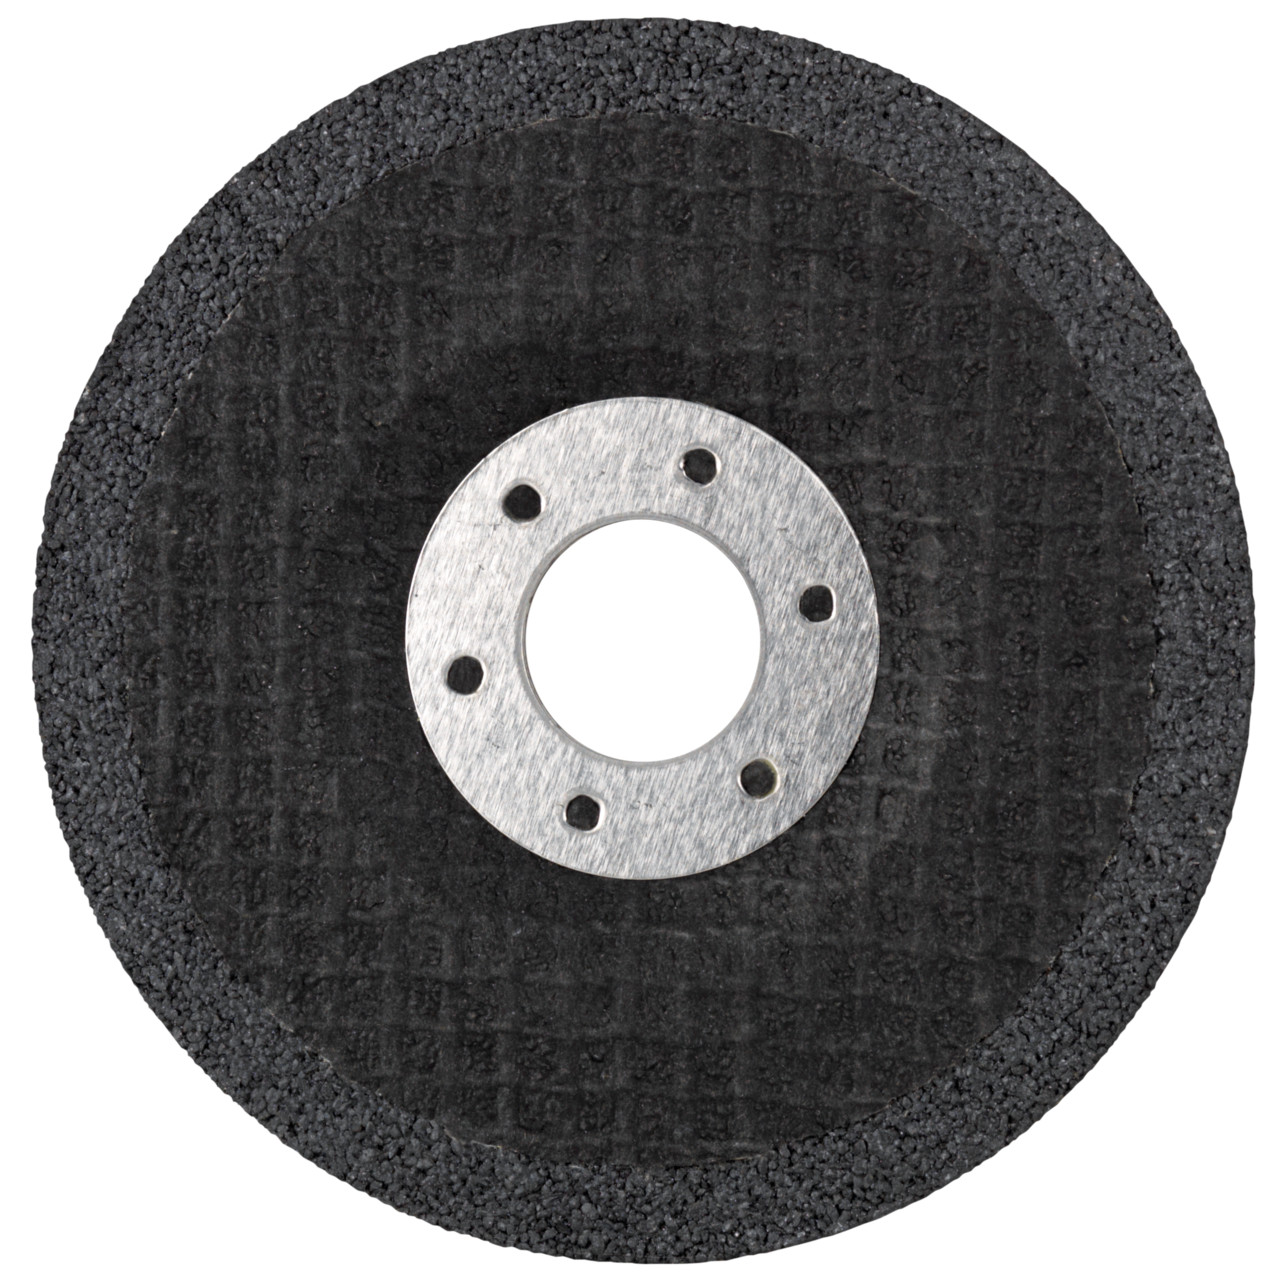 Tyrolit Cutting disc CUT AND GRIND DxUxH 150x3x22.23 2in1 for steel and stainless steel, shape: 27EC - offset version (CUT AND GRIND) , Art. 743946